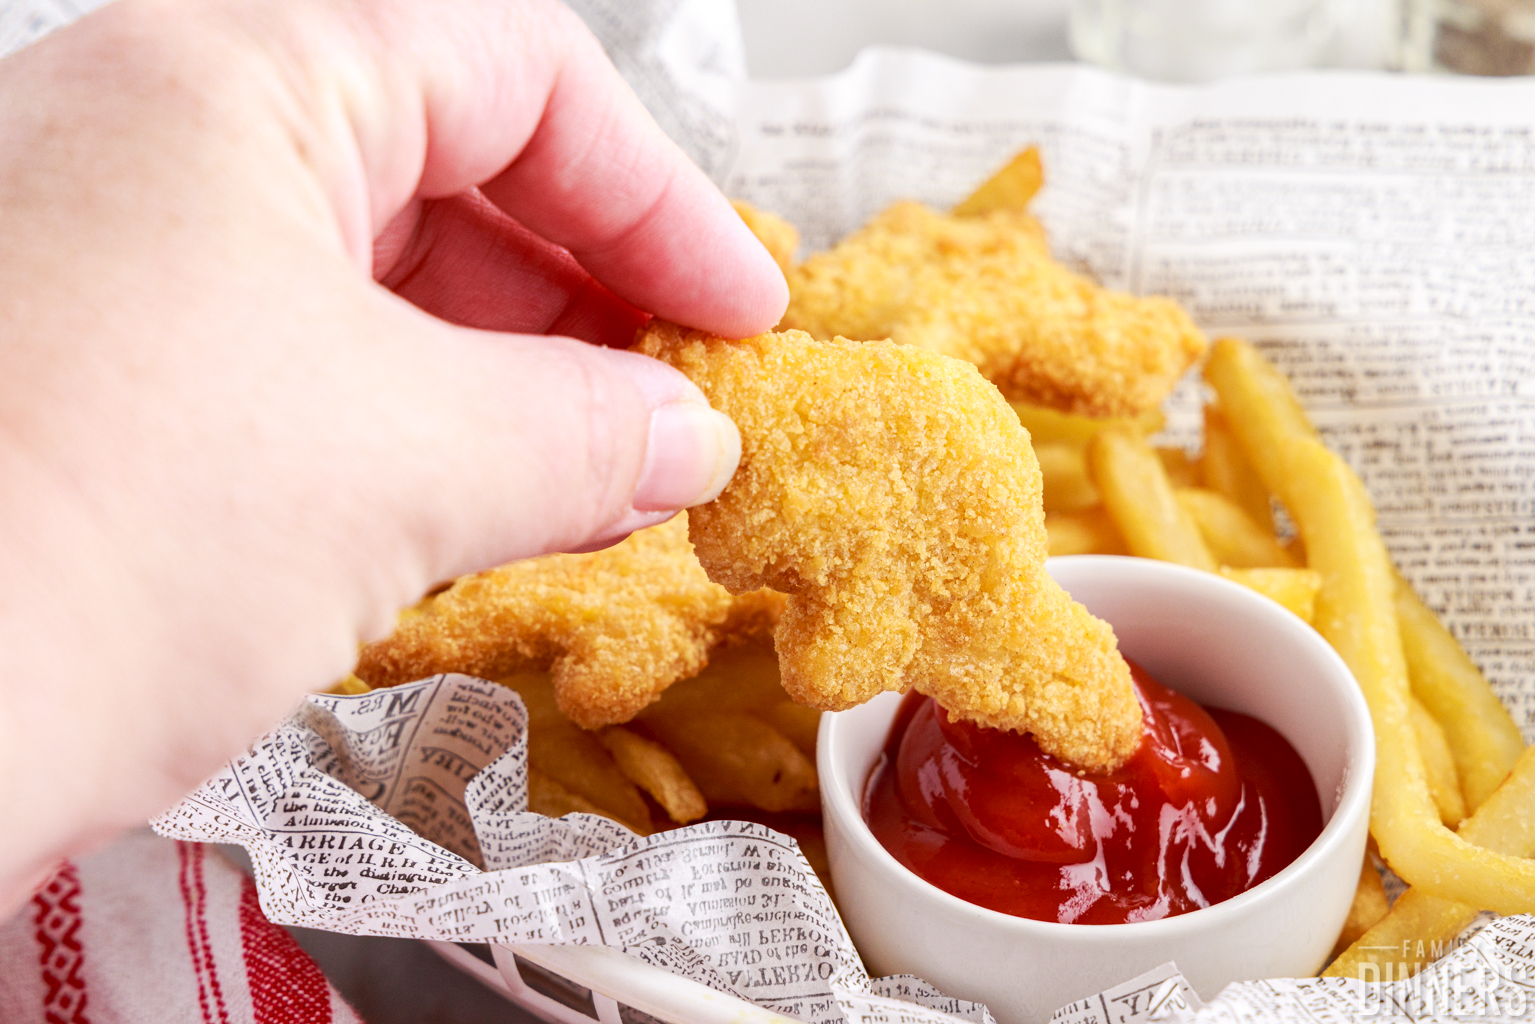 hand holding chicken nugget dipped into ketchup